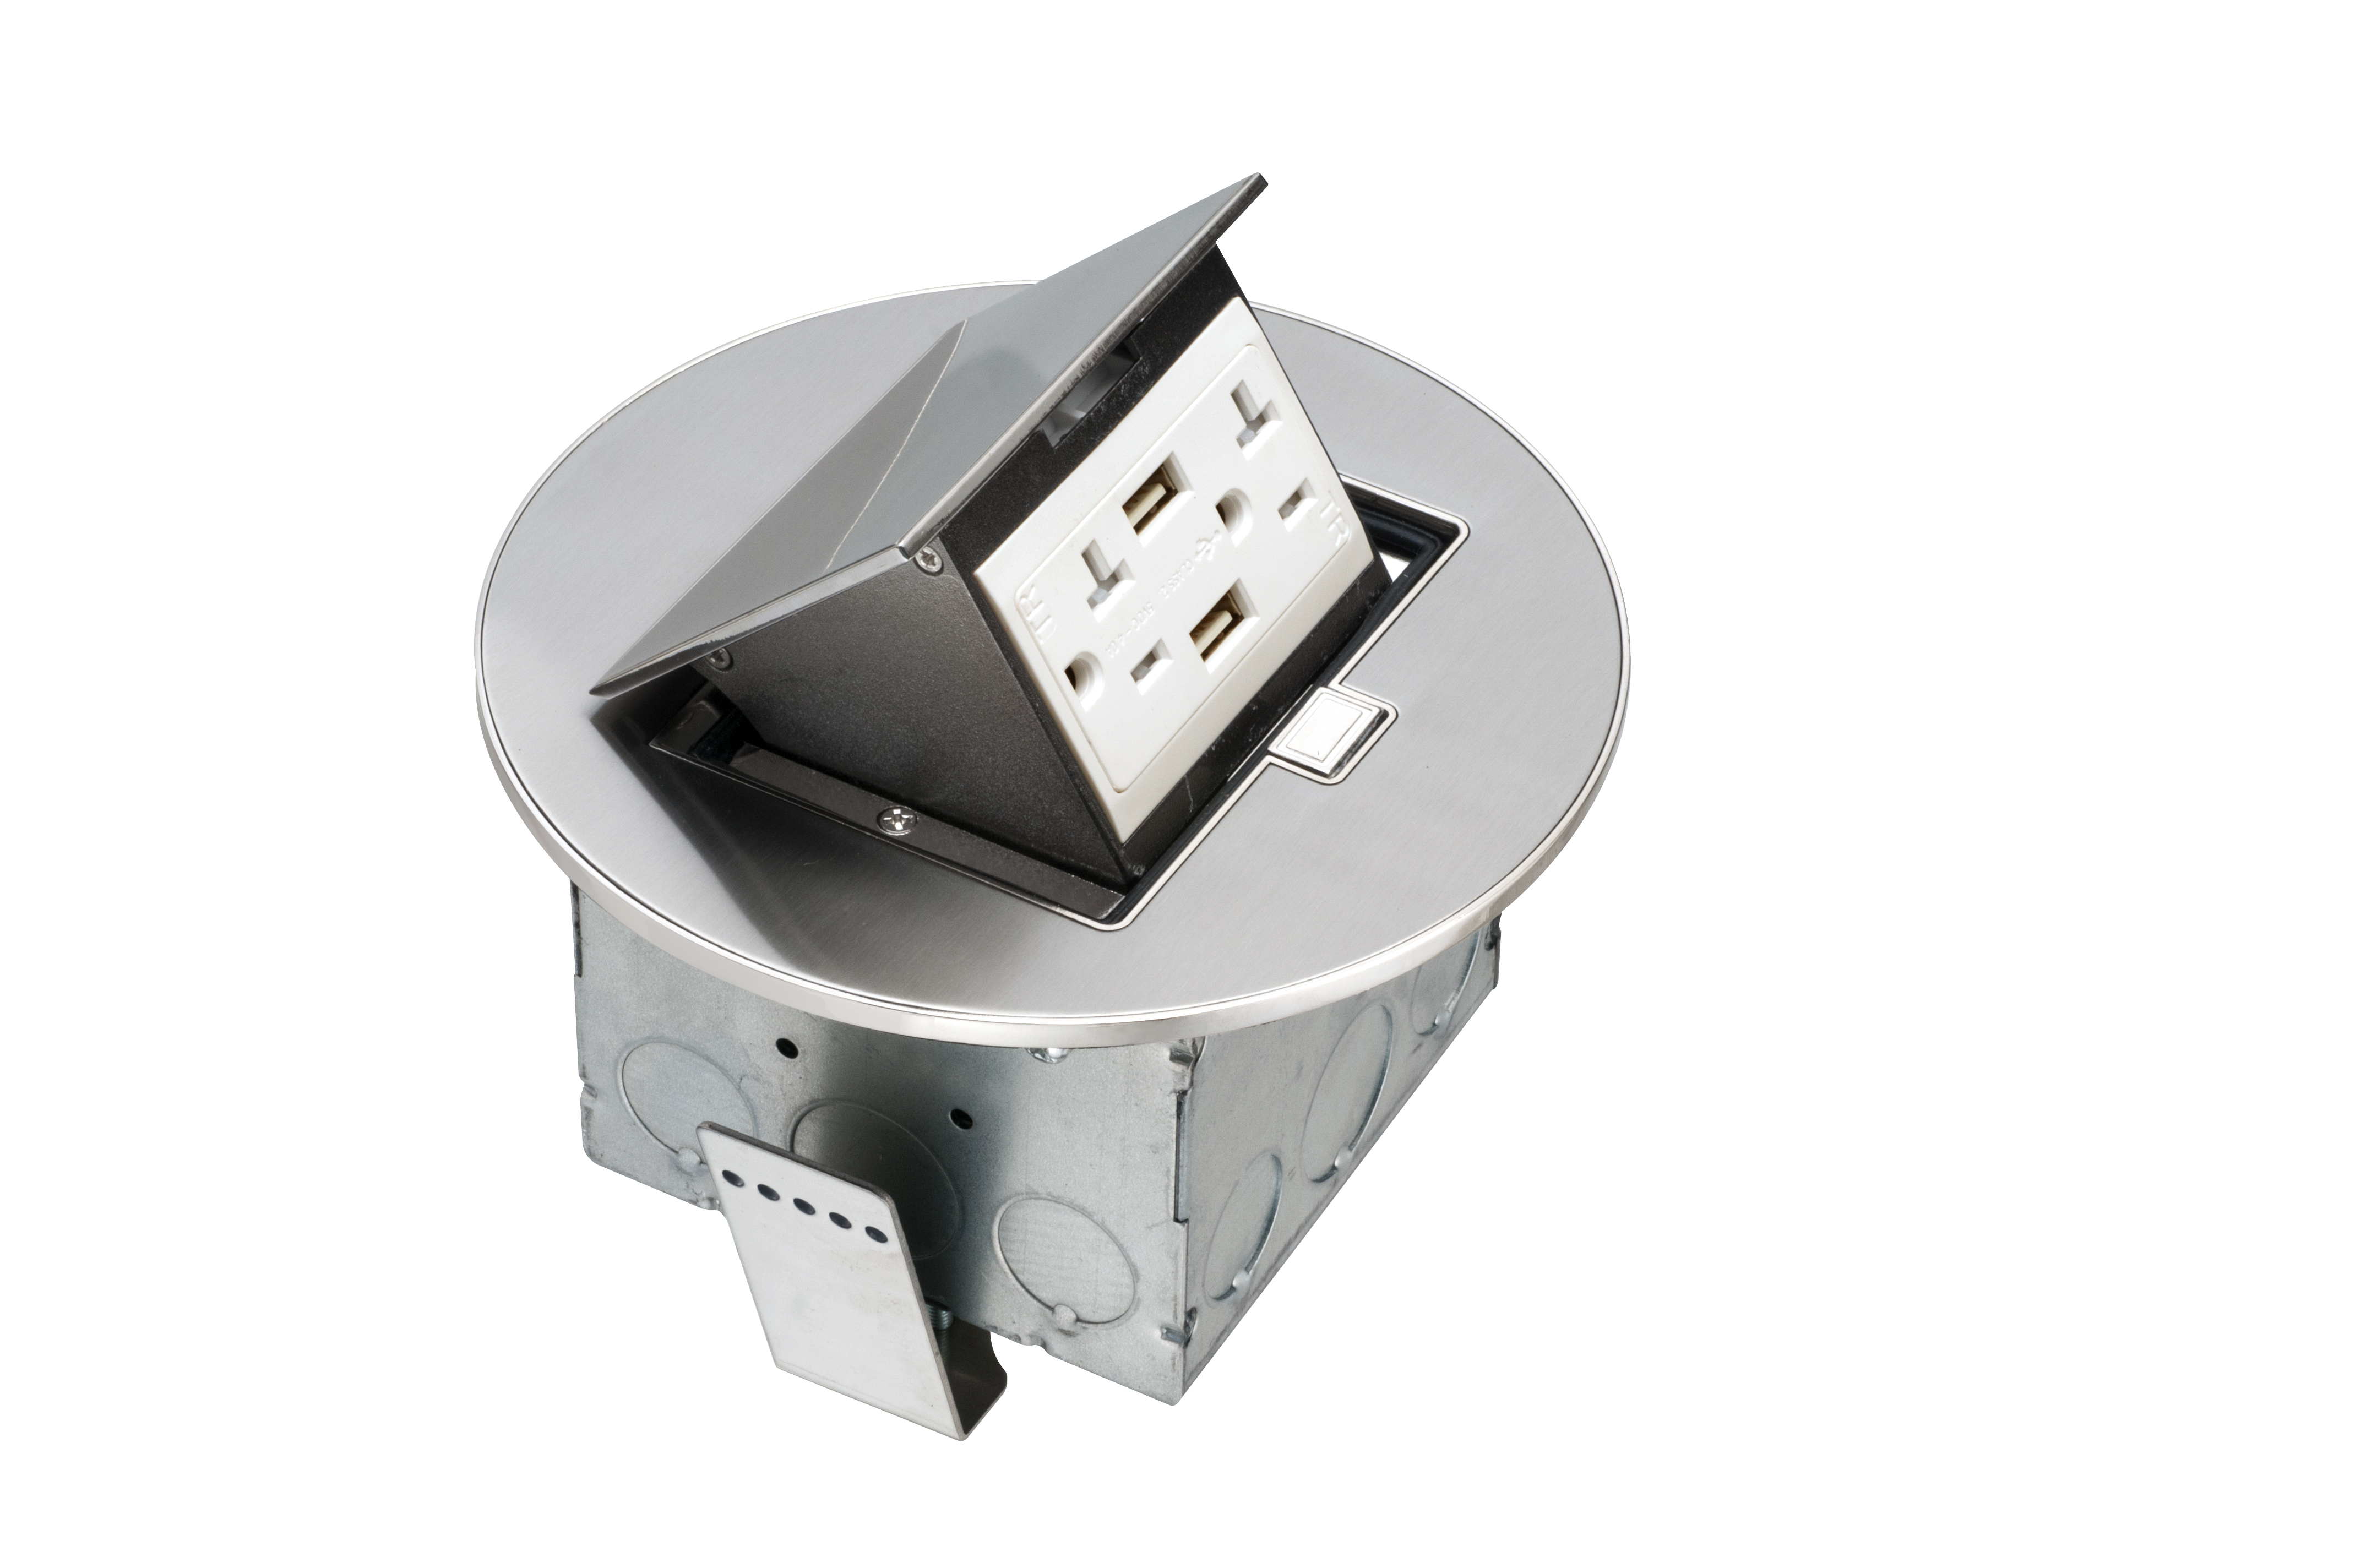 Round stainless steel counter top box. Comes with a 20 amp tamper resistant decorator style receptacle with (2) USB ports.